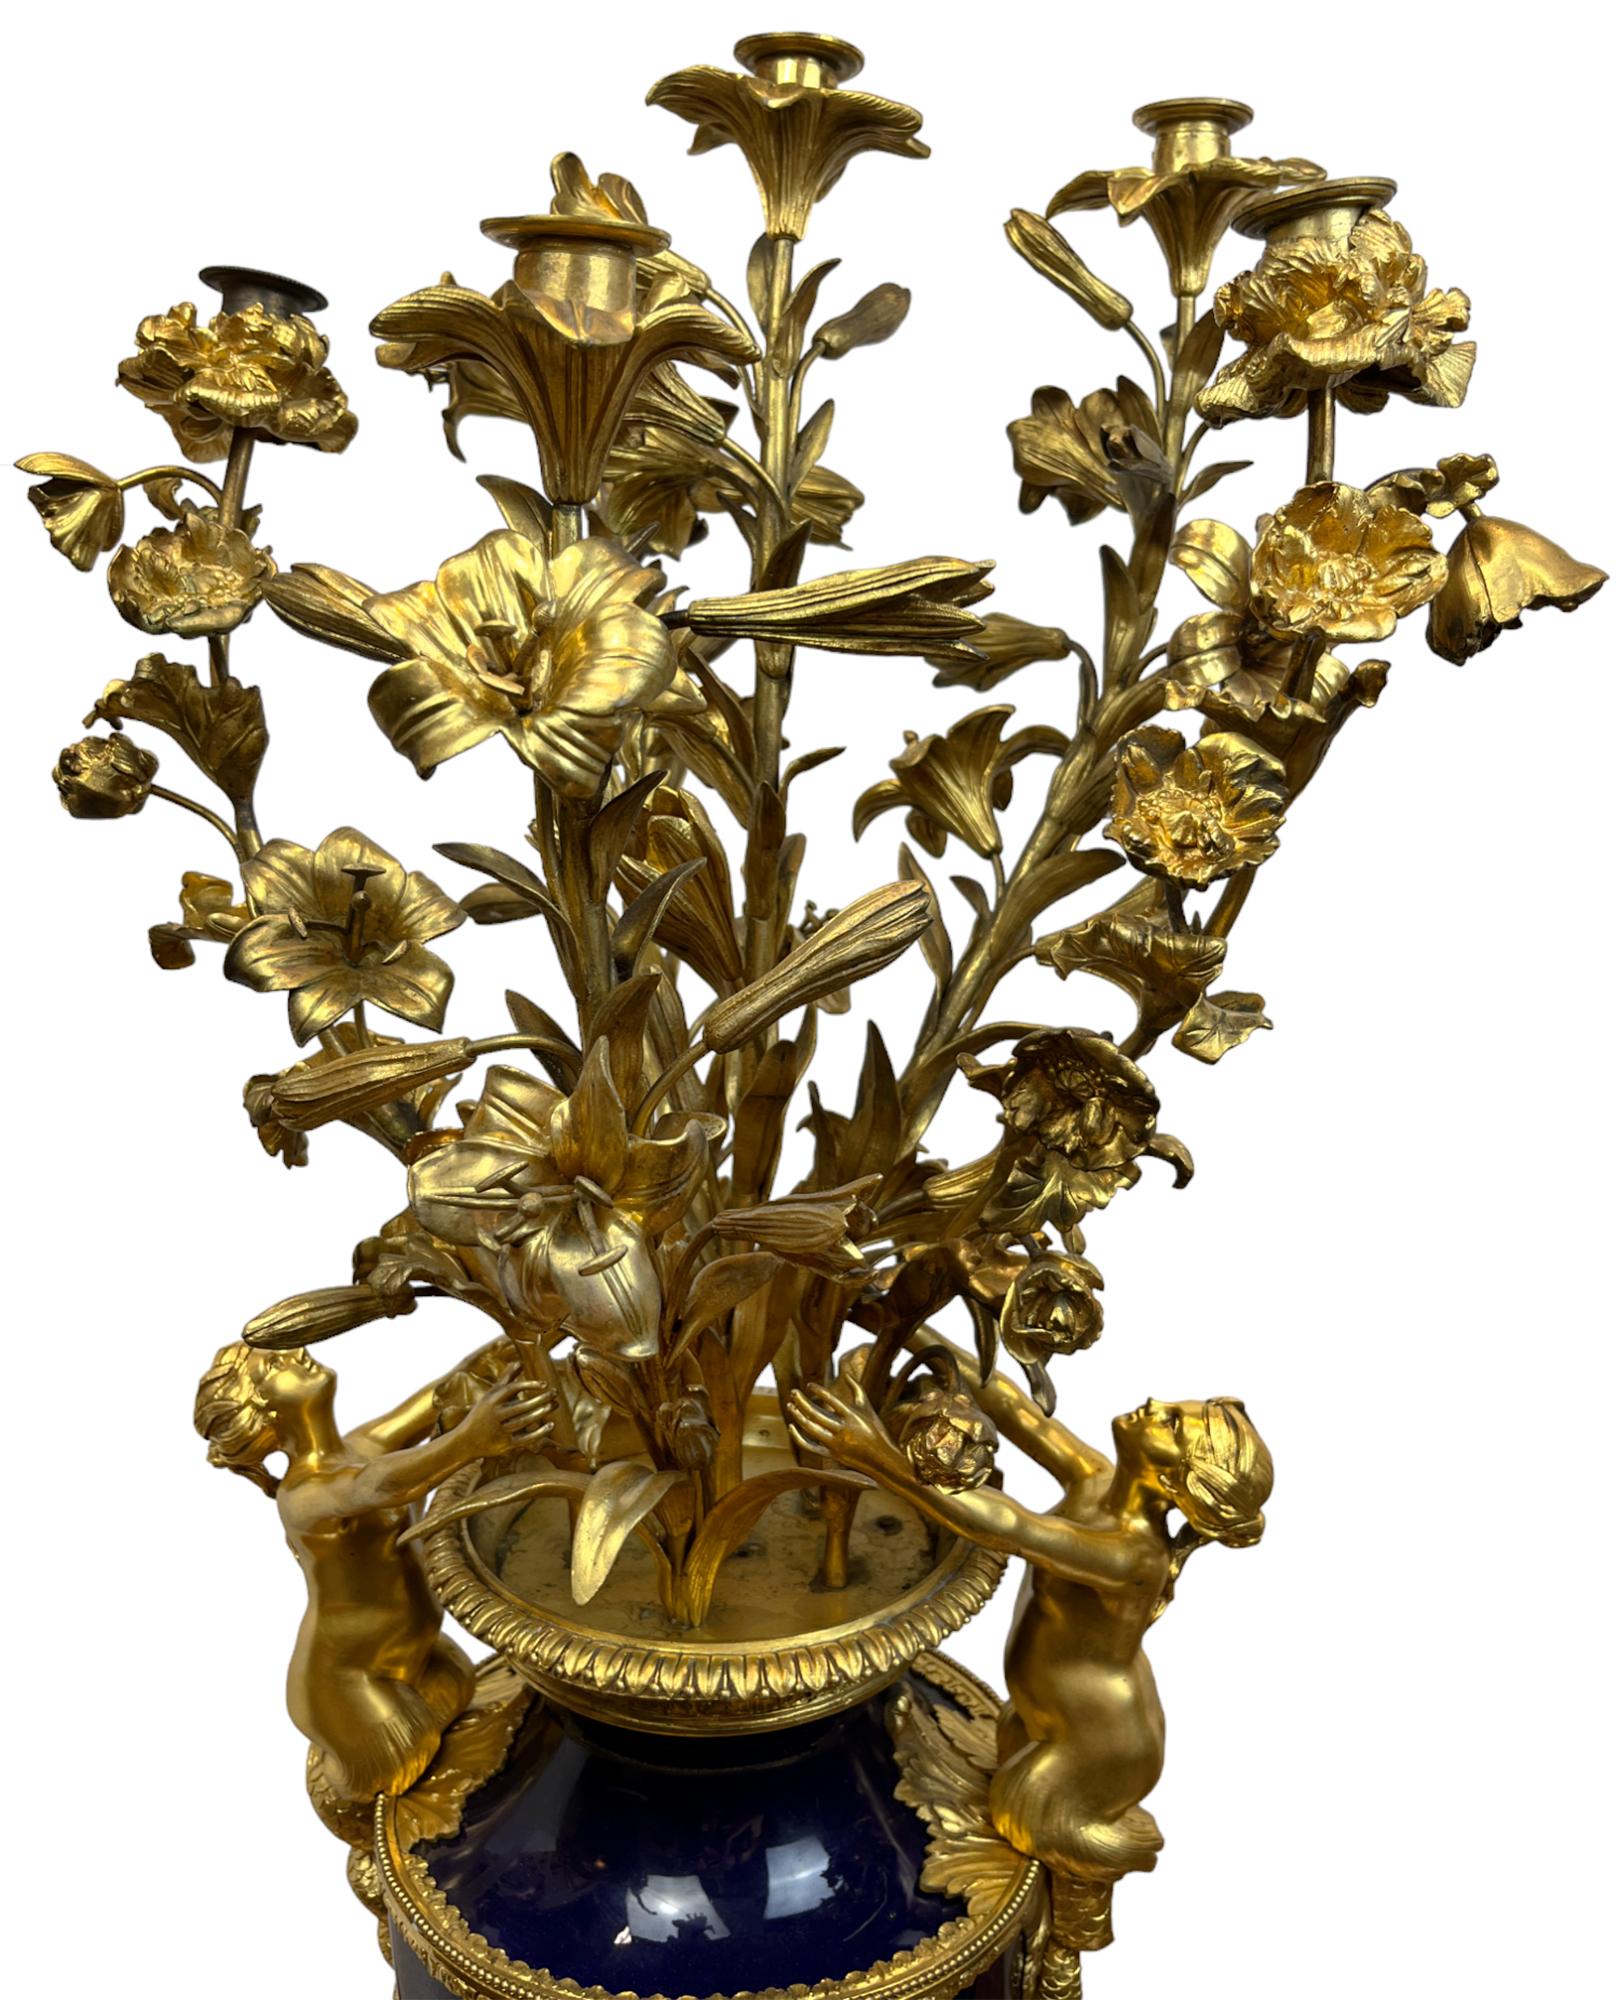 Cast Pair Of Ormolu Mounted Sèvres-style Bouquet Candelabras For Sale